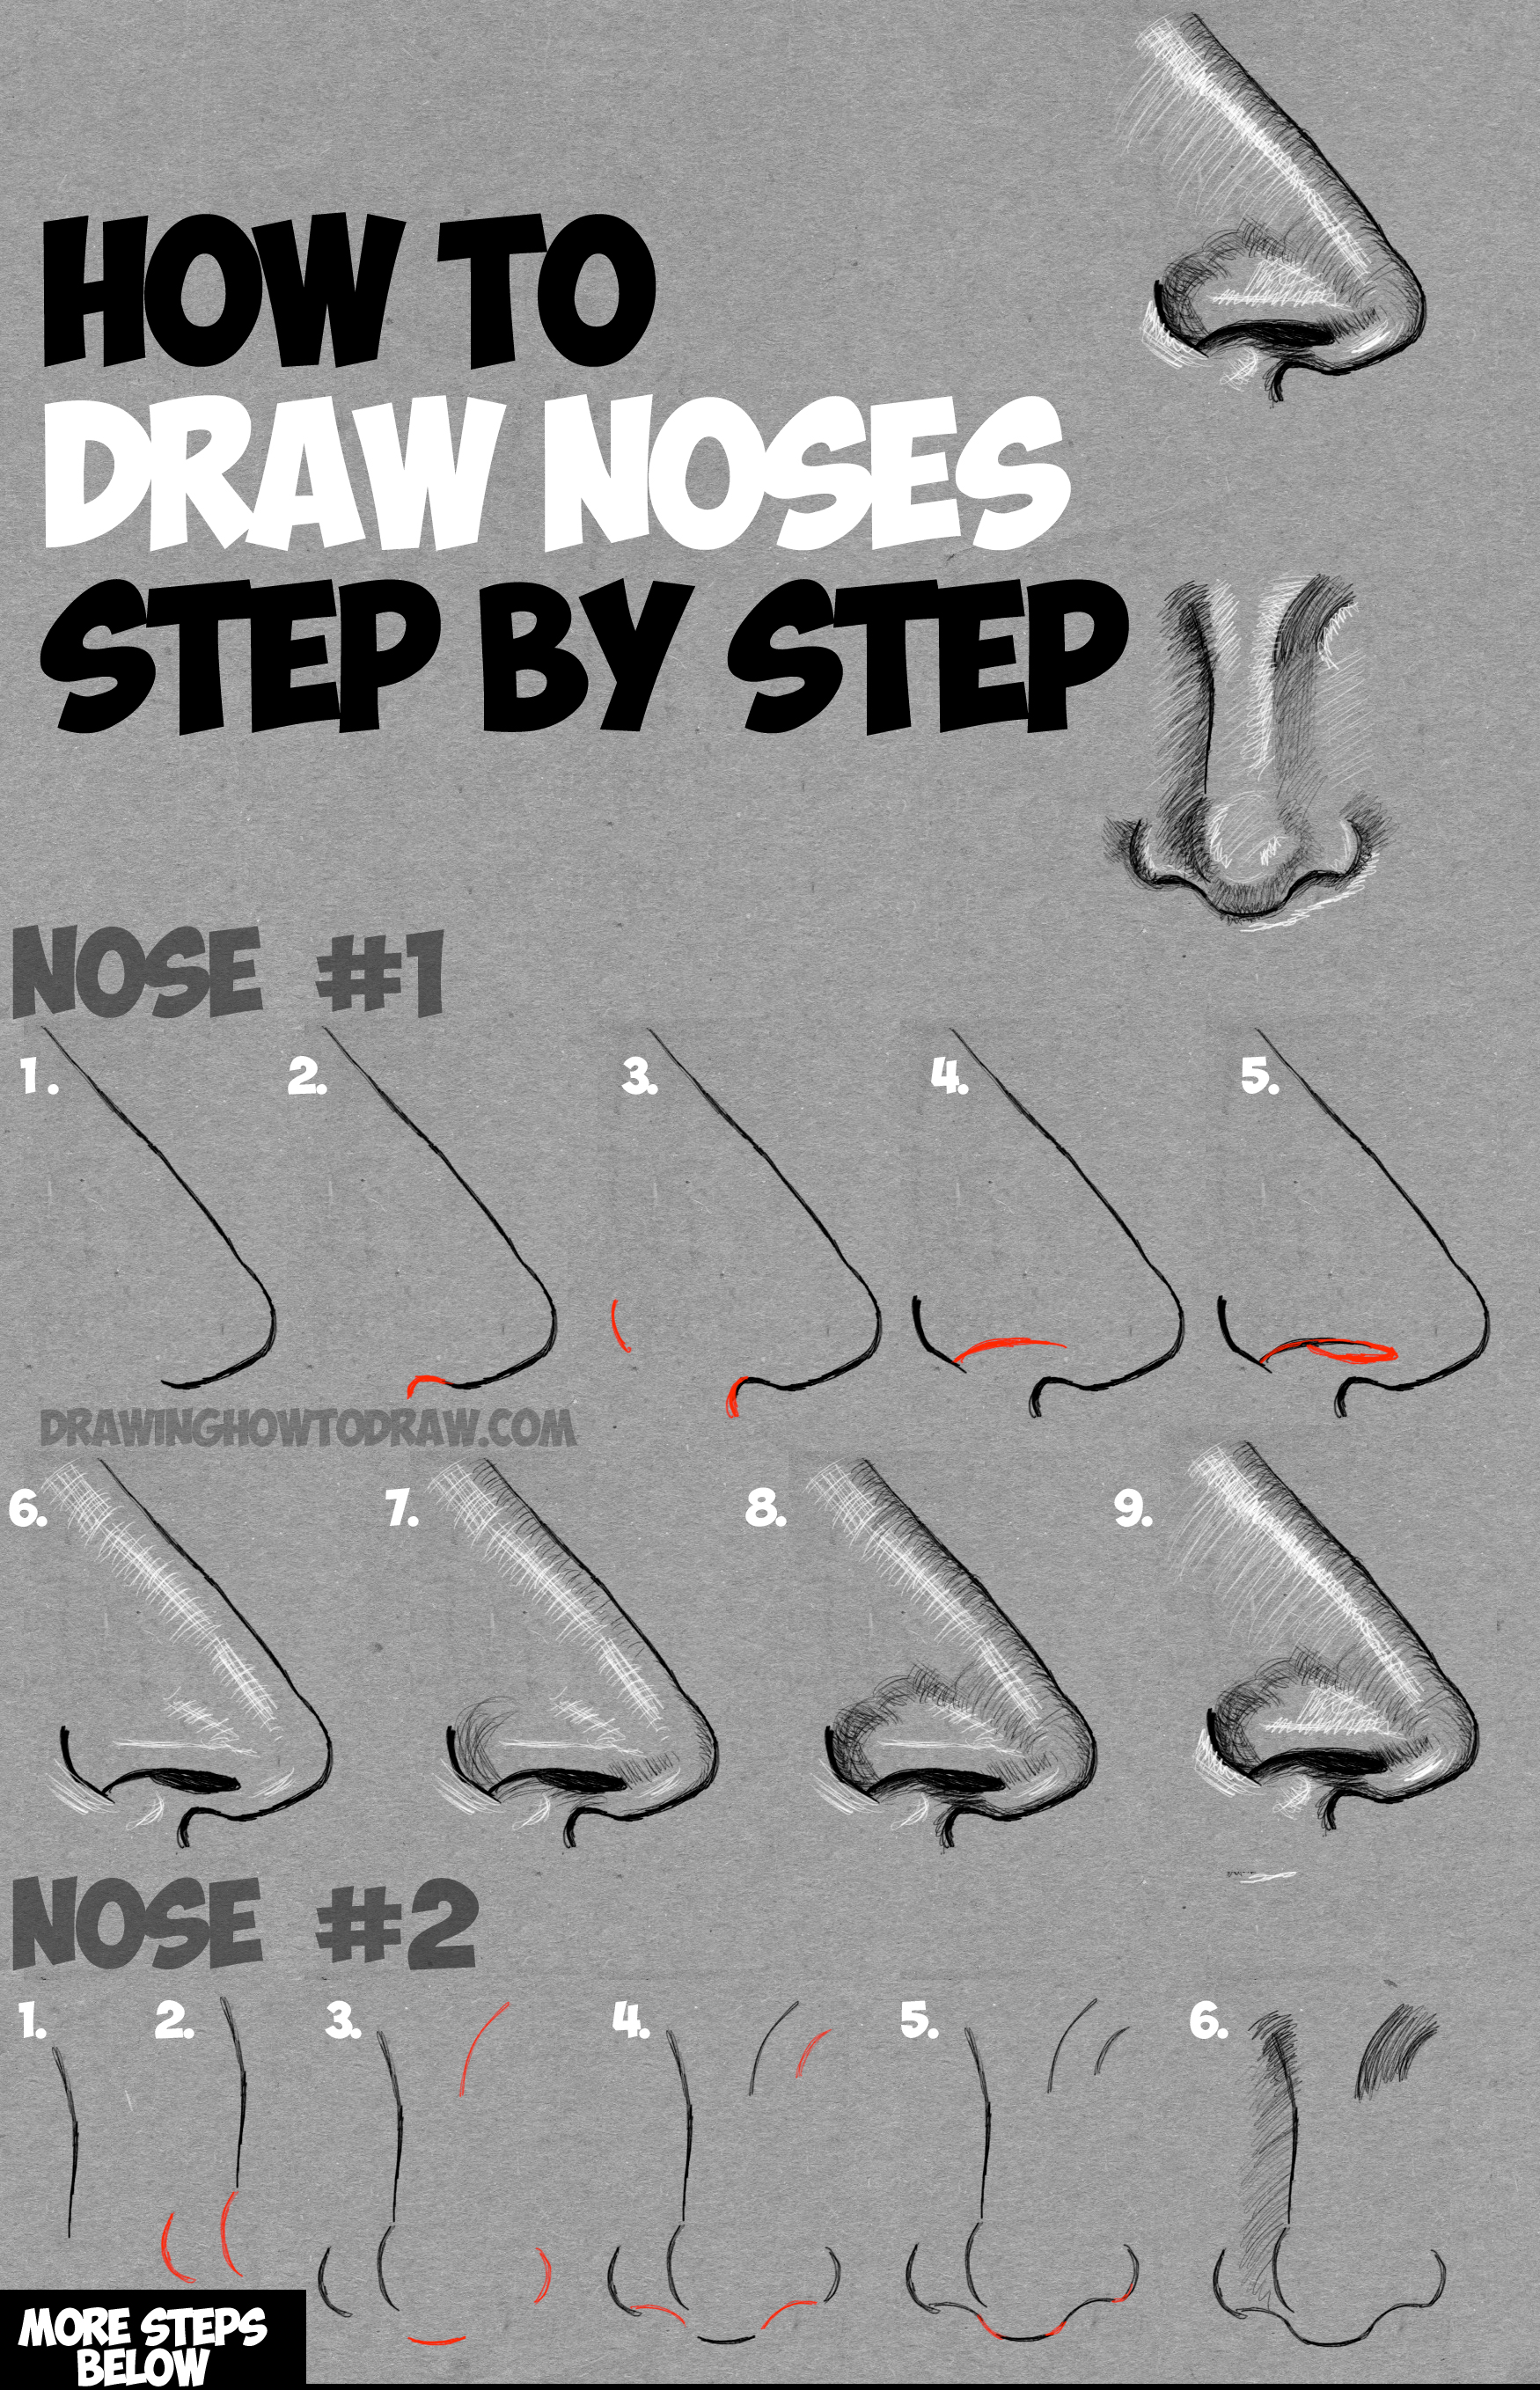 How to Draw a Side View Nose : Pencil Sketch - YouTube